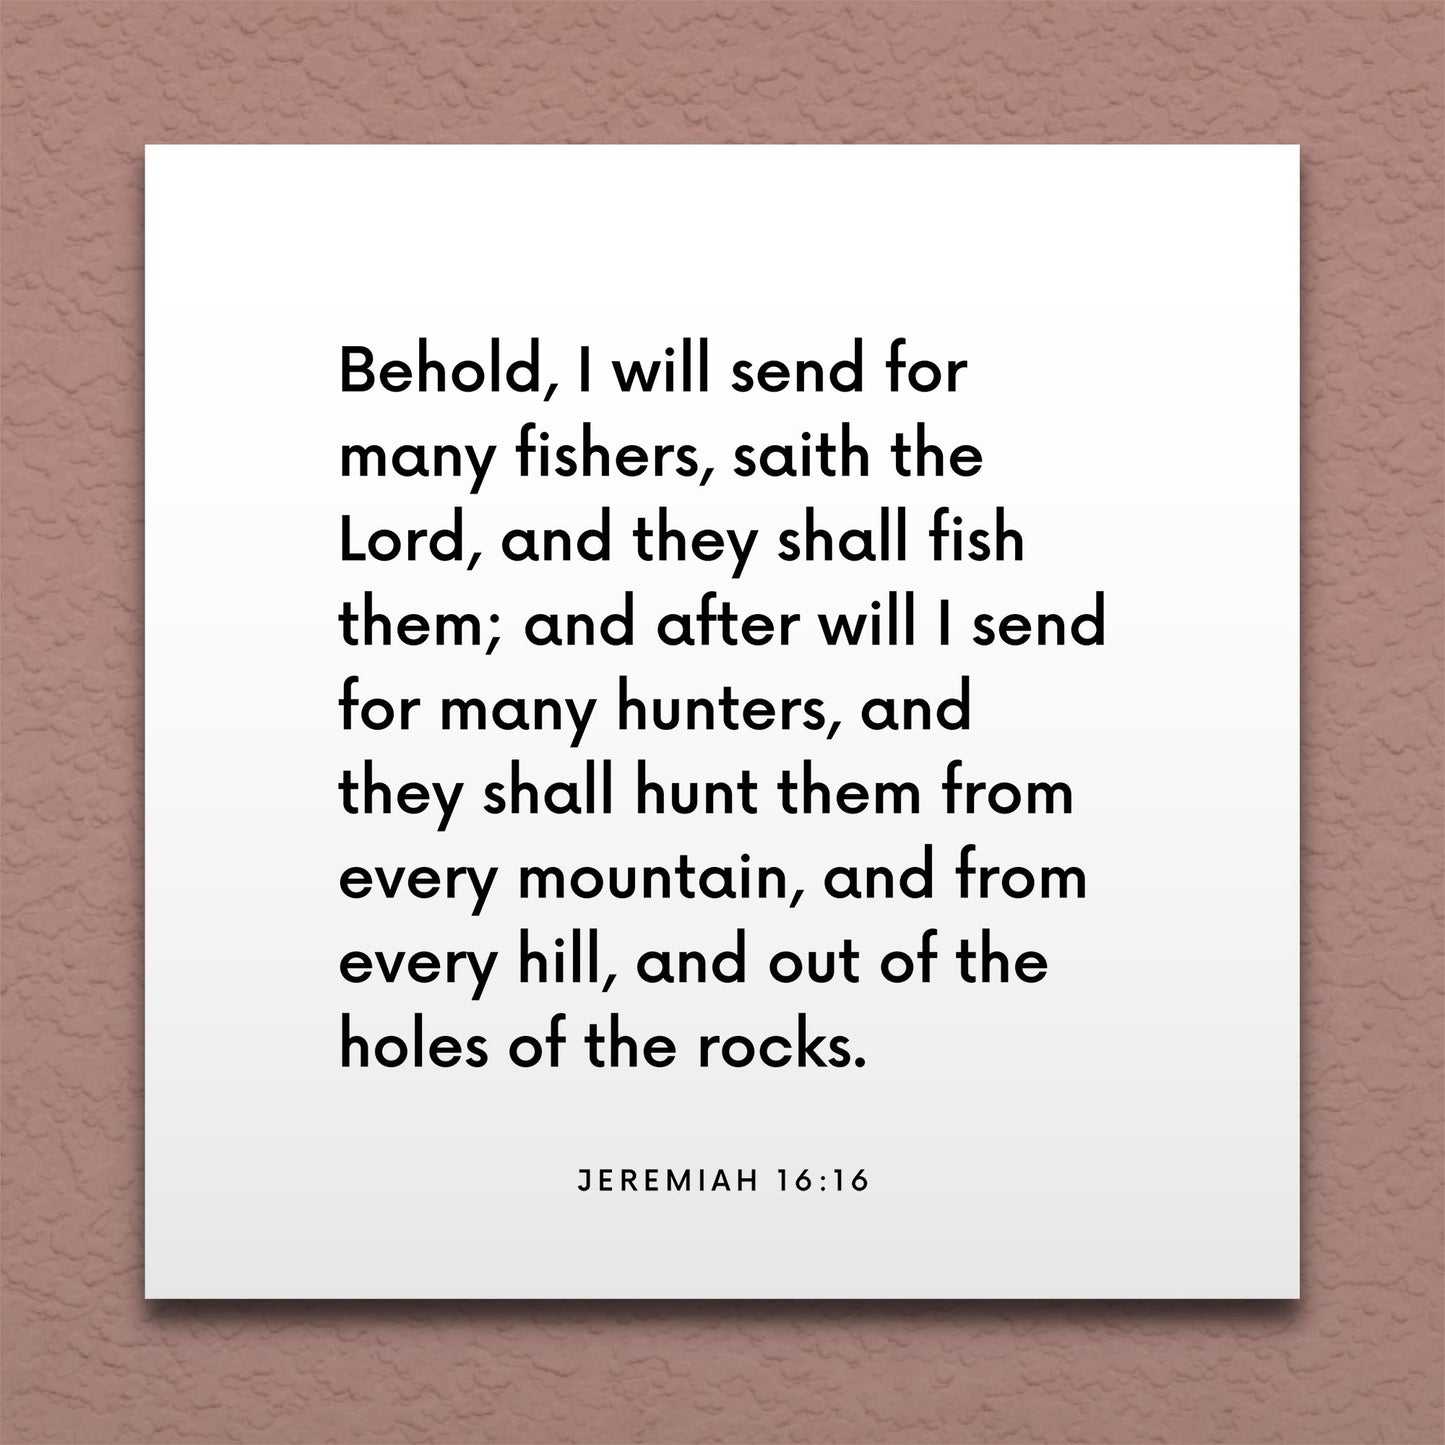 Wall-mounted scripture tile for Jeremiah 16:16 - "I will send for many fishers, I will send for many hunters"